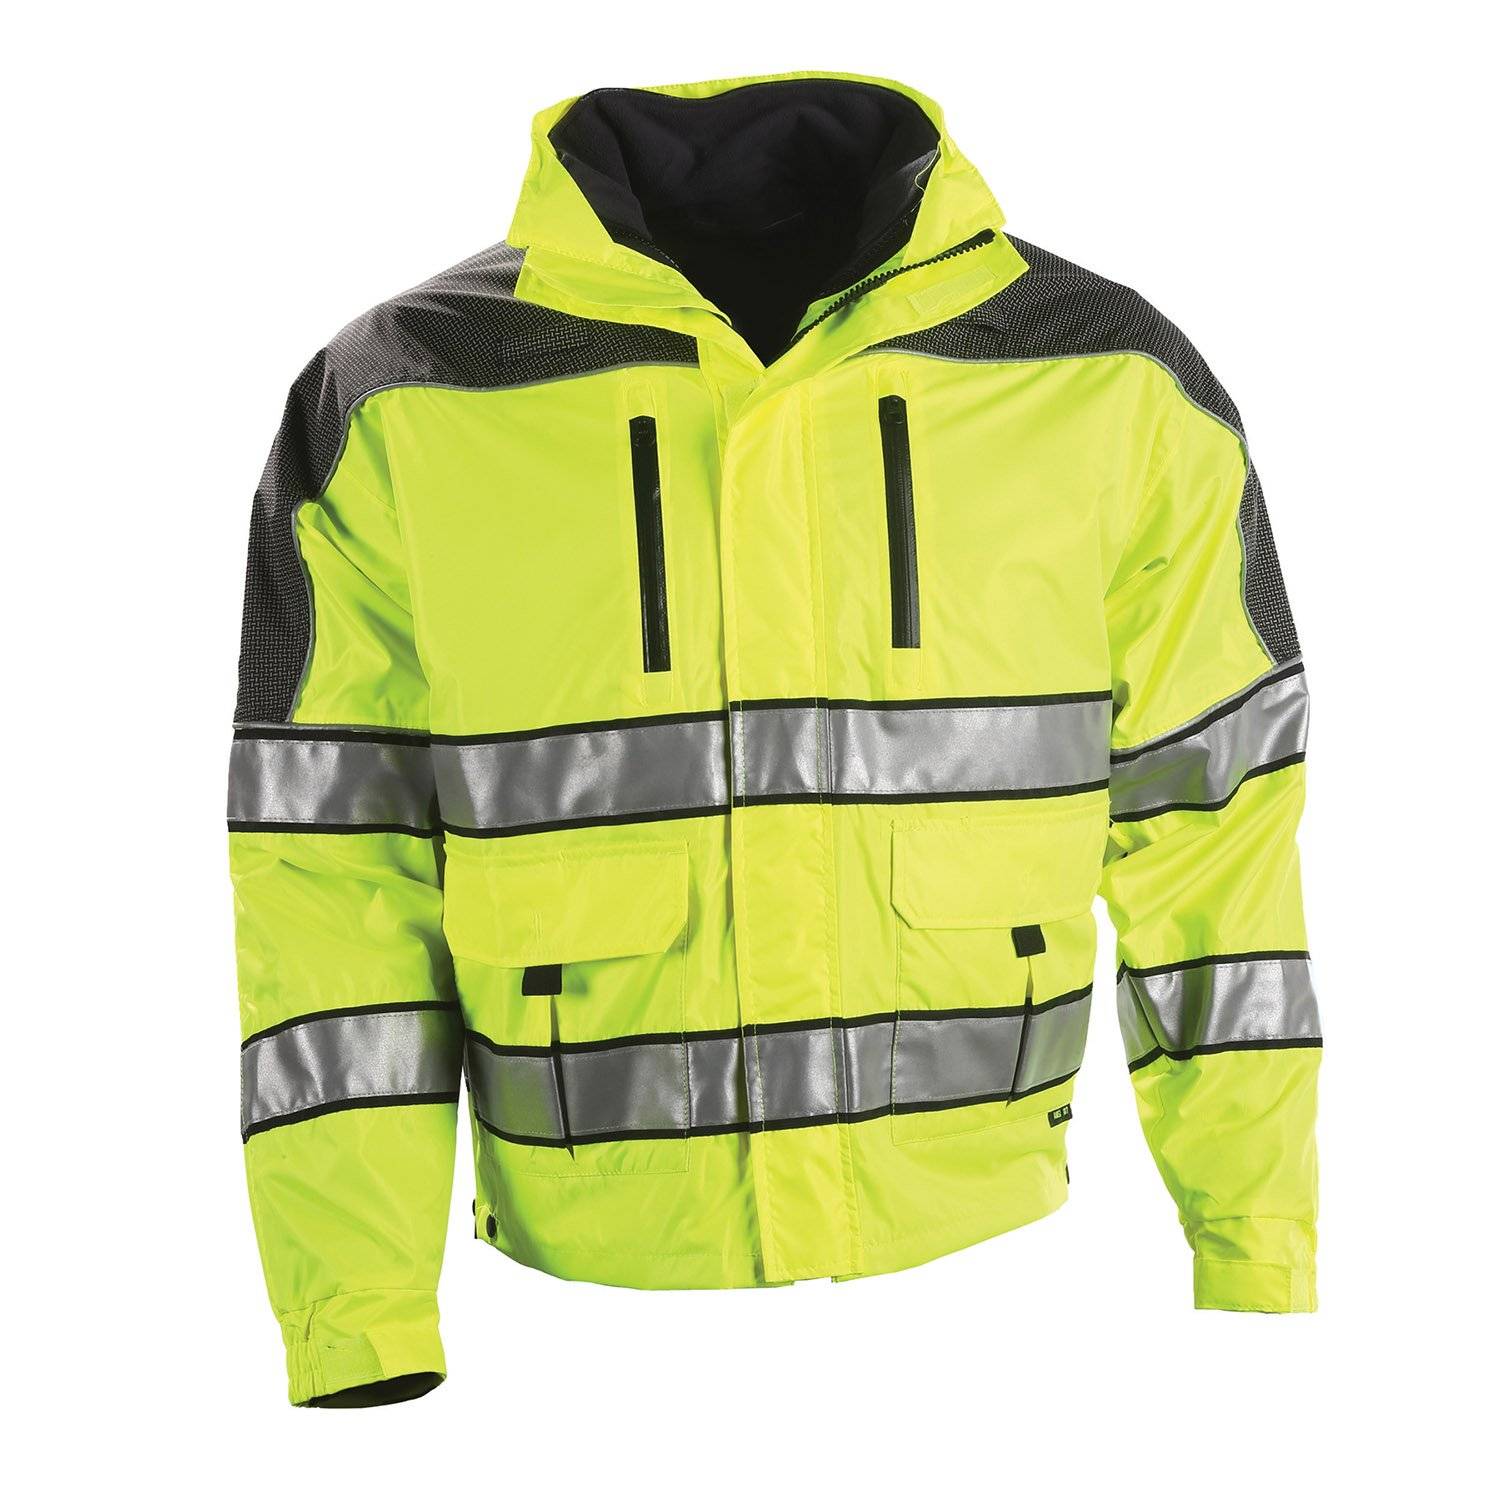 Gerber Outerwear Eclipse SX Lime Jacket with Warrior Softshe